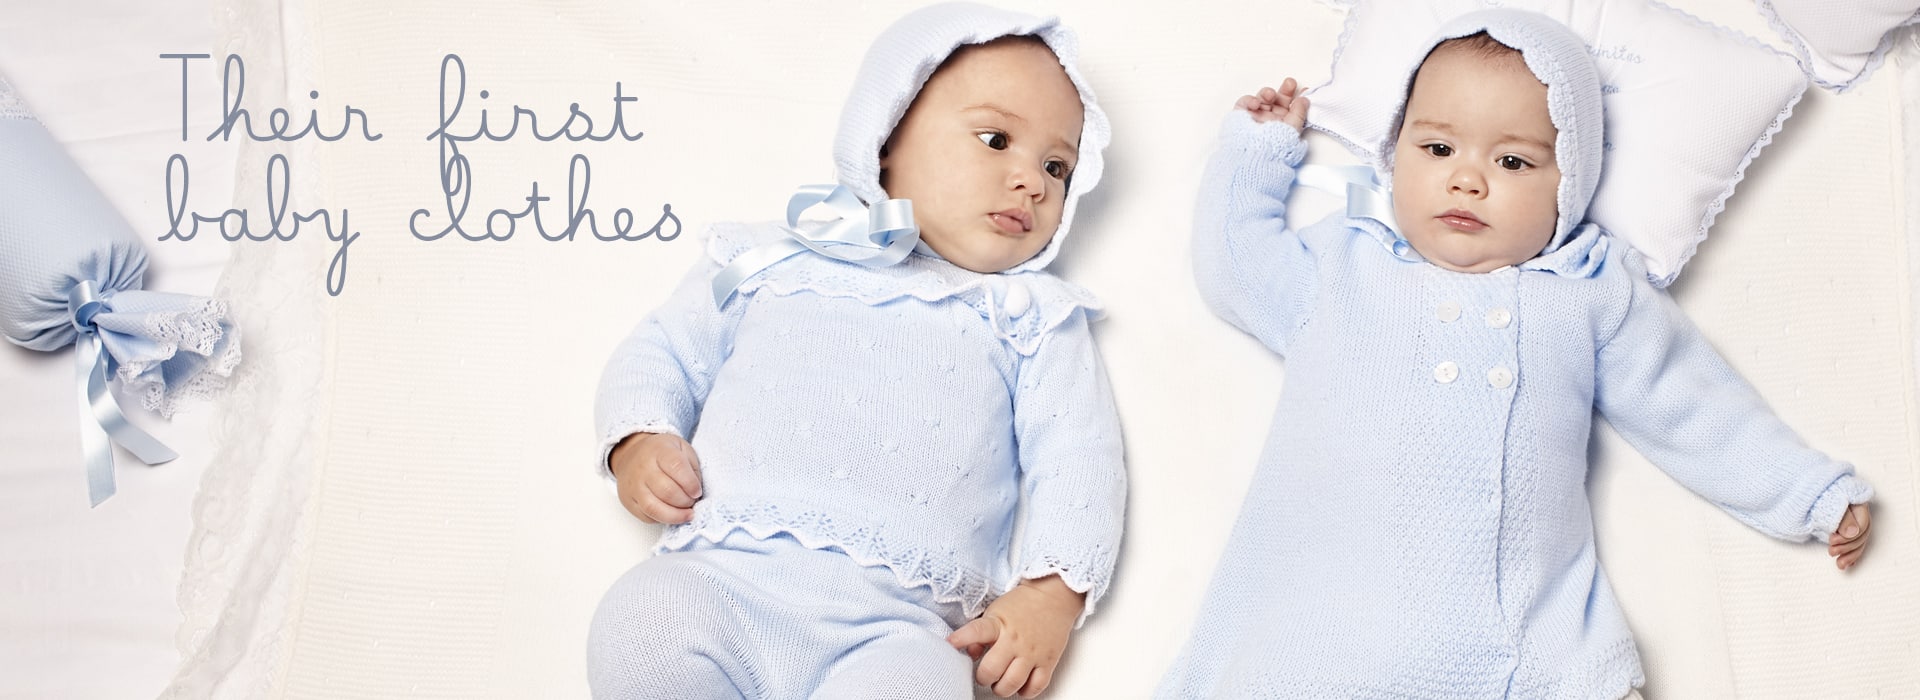 baby knitted clothes